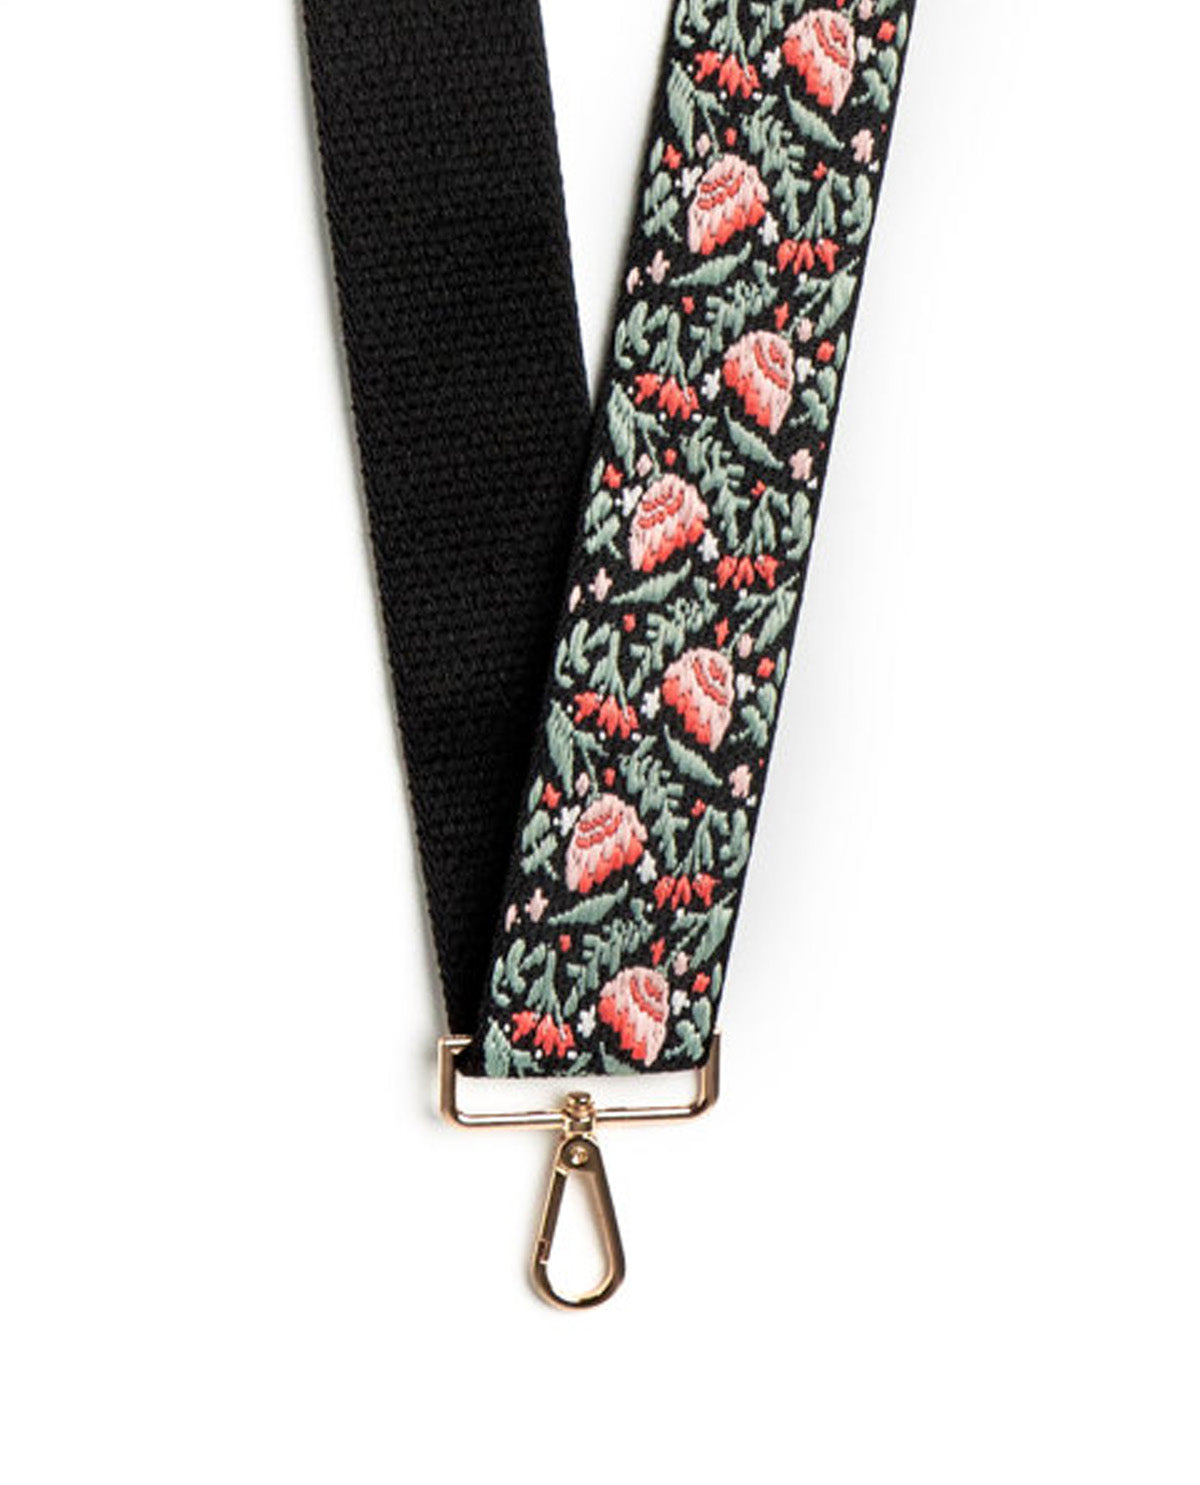 Embroidered Interchangeable Guitar Straps